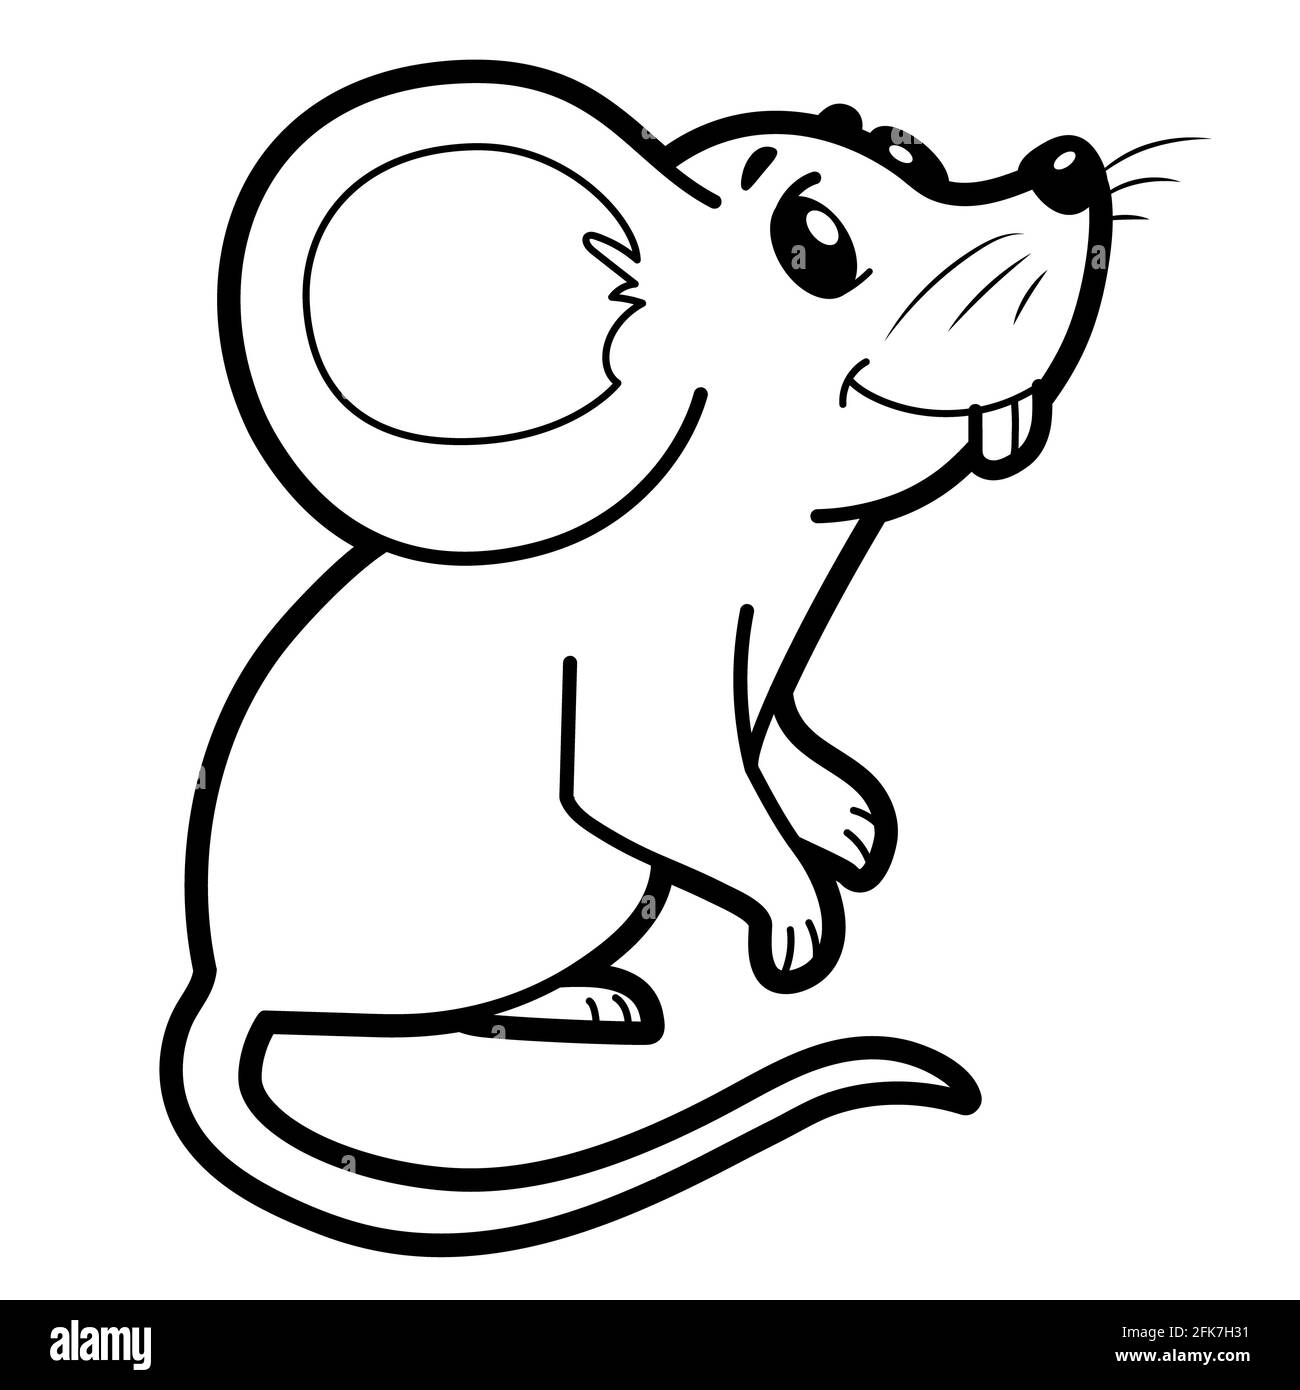 Coloring book or page for kids. mouse black and white illustration Stock Photo